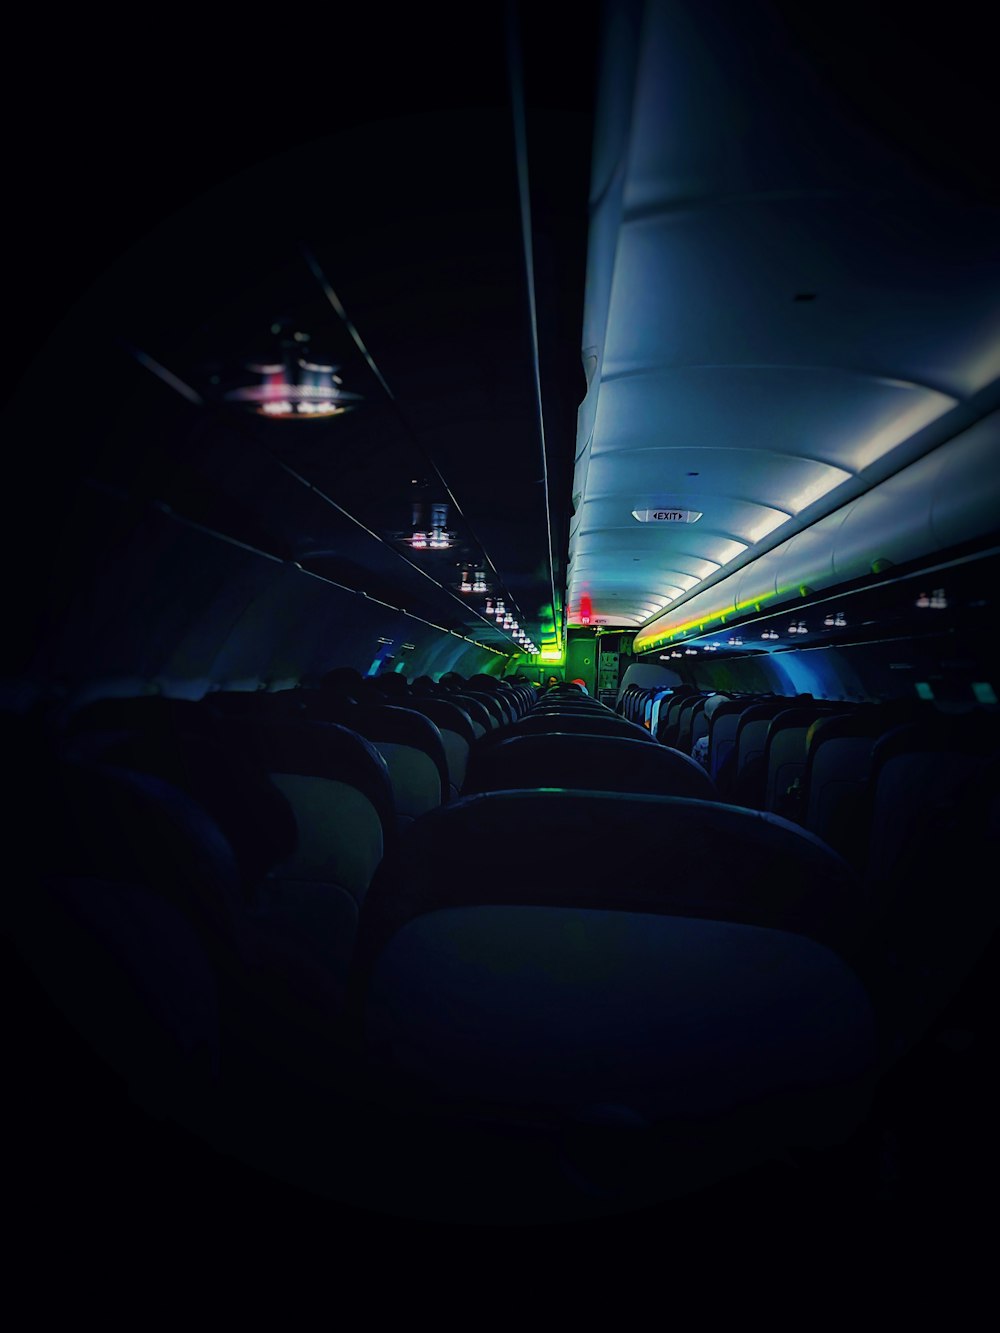 a view of the inside of an airplane at night